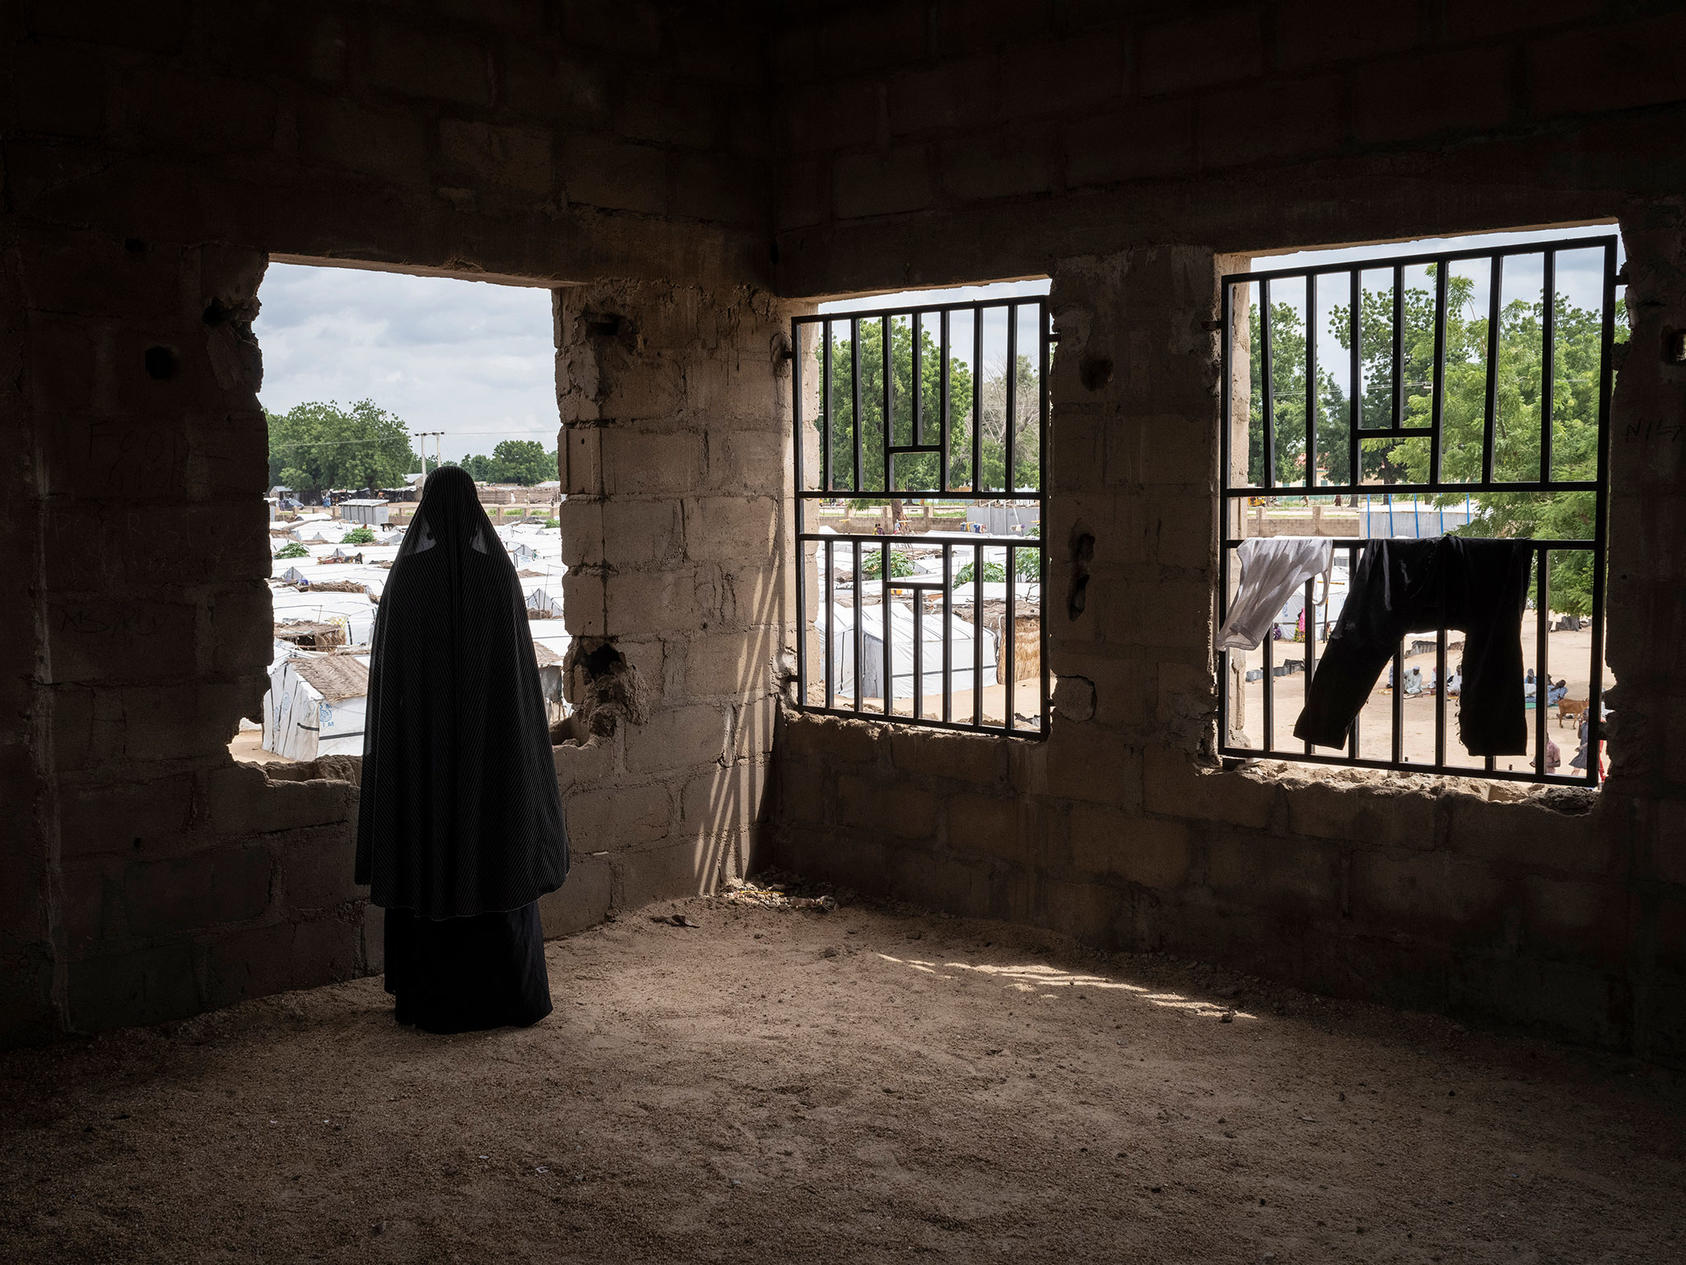 A woman who was kidnapped by Boko Haram and was recruited as a bomber, stands for a portrait, Aug 2019, at Konduga IDP camp. About 3.3 million of Nigeria’s 211 million people are displaced amid the country’s turmoil. (Laura Boushnak/The New York Times)